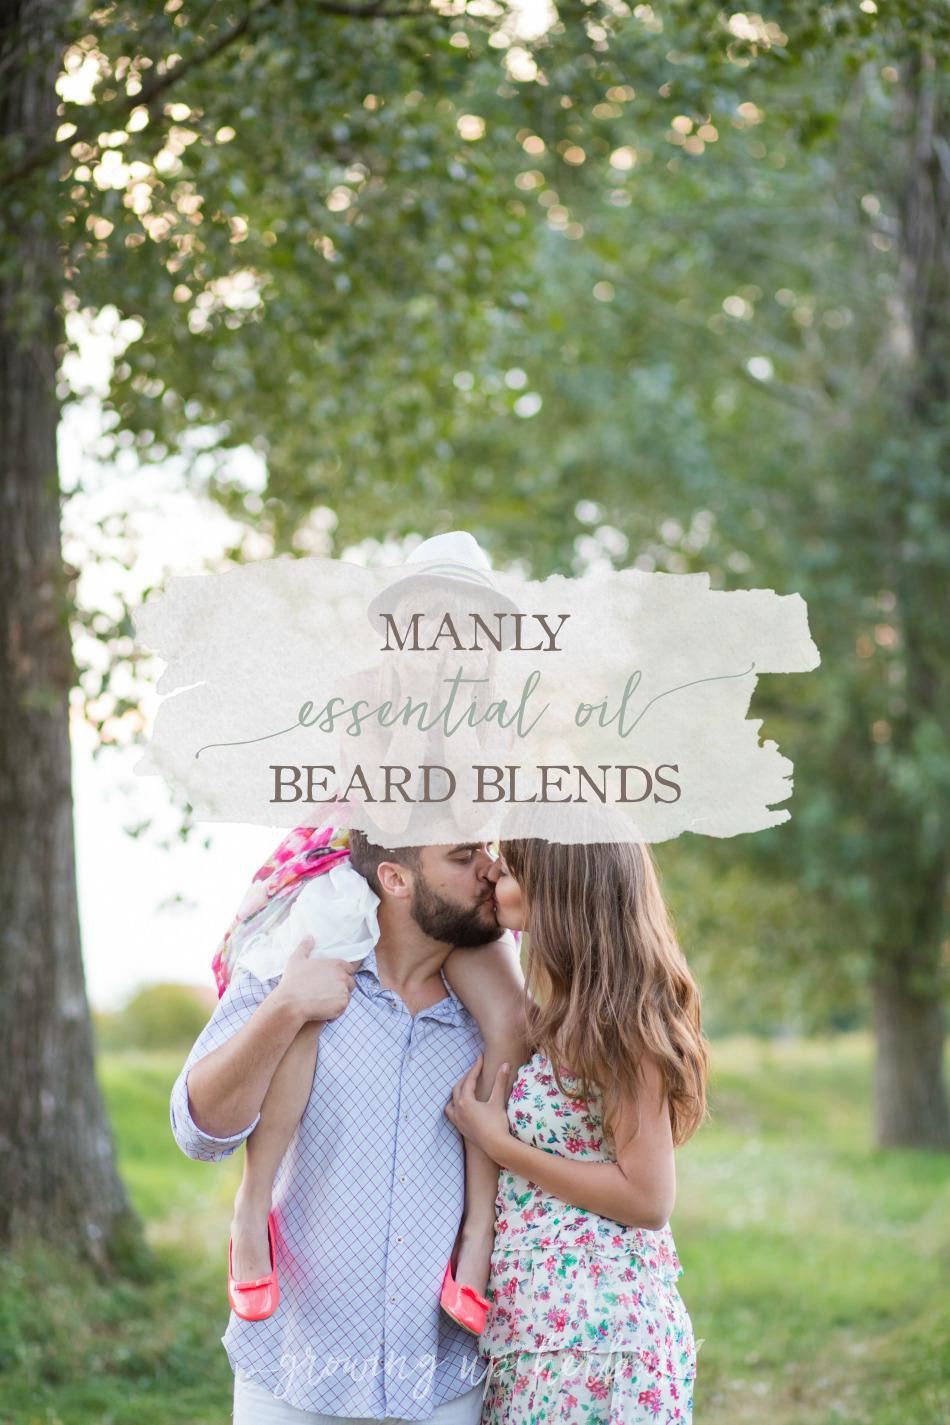 Manly Essential Oil Beard Blends | Growing Up Herbal | Today I'm sharing 2 manly essential oil beard blends that husbands, wives, and the kids will love!